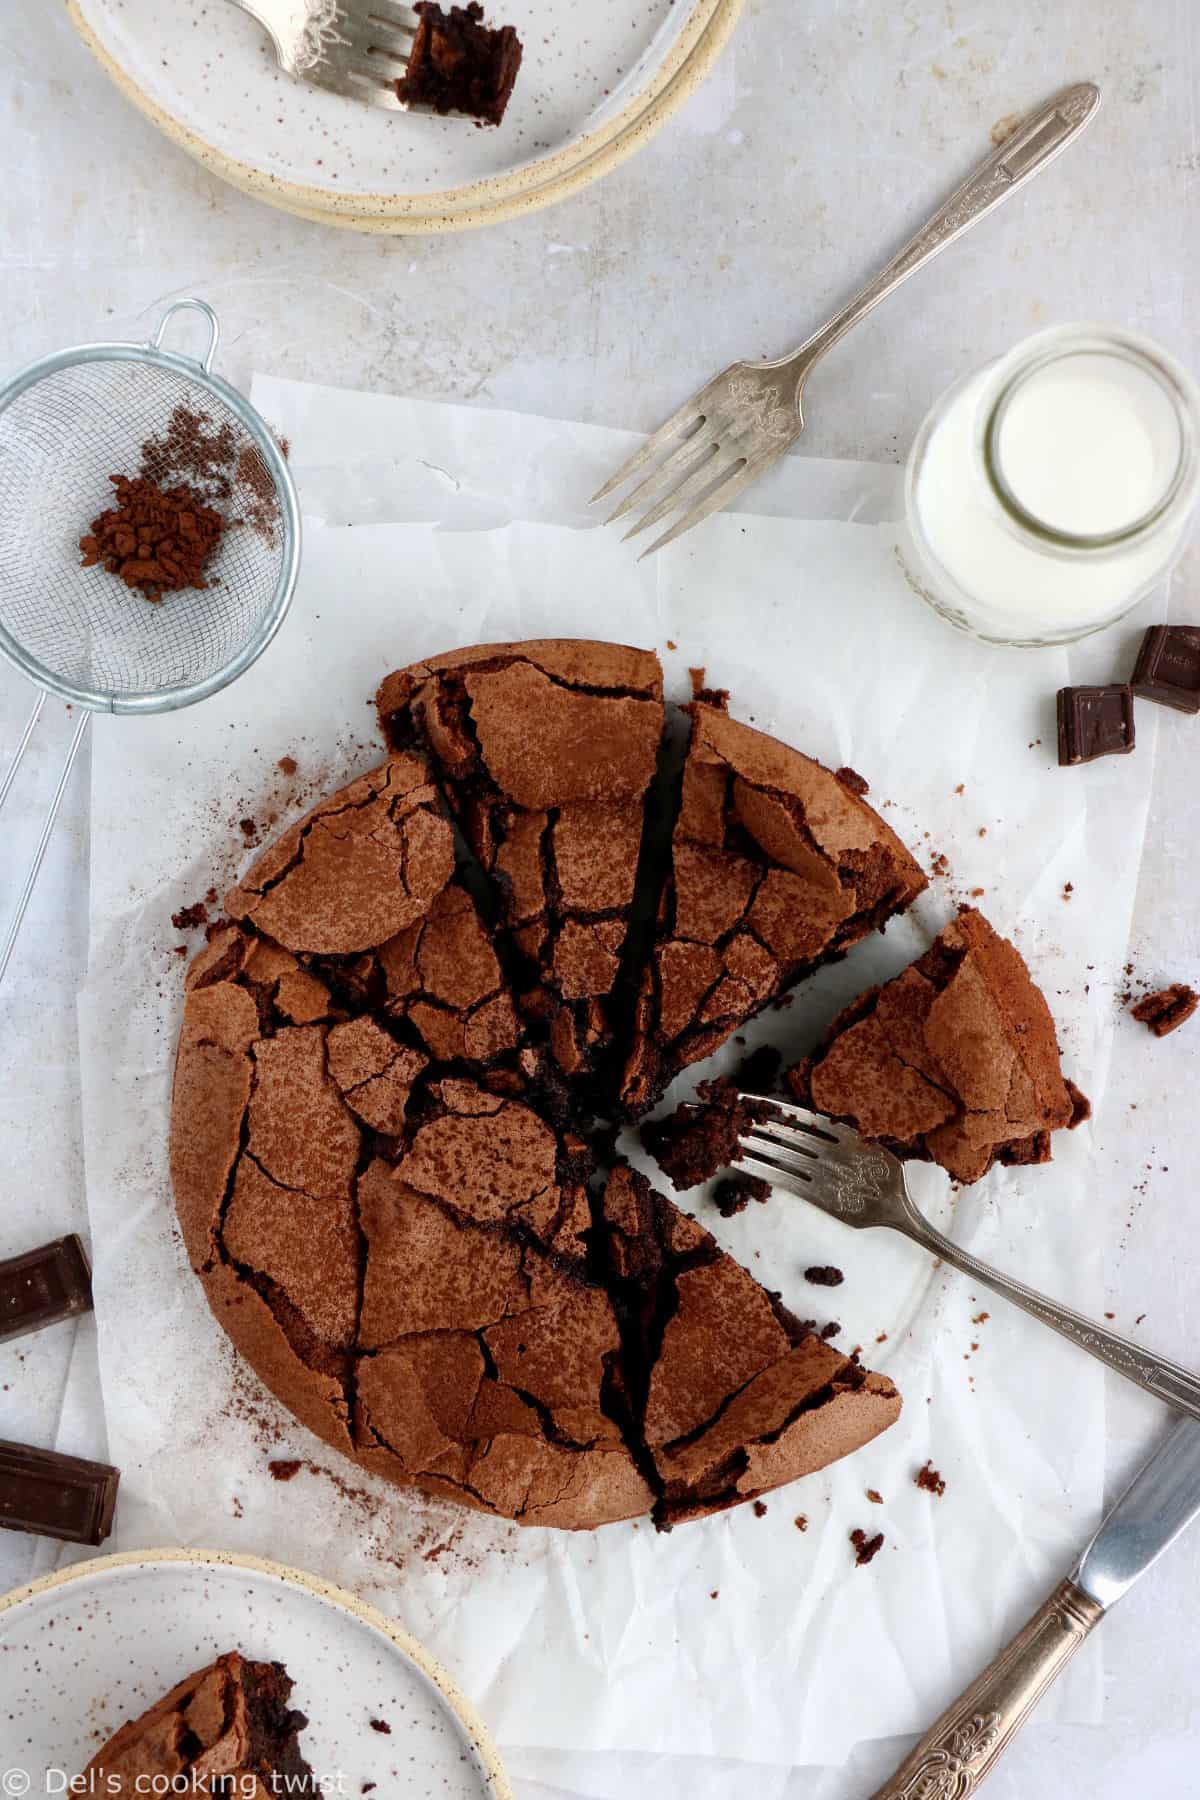 This is hands down the BEST flourless chocolate cake ever! Rich, chocolatey, with a light and fluffy texture and an irresistible crackly topping, it is an absolute chocolate lover's dream and might just become your favorite chocolate cake.